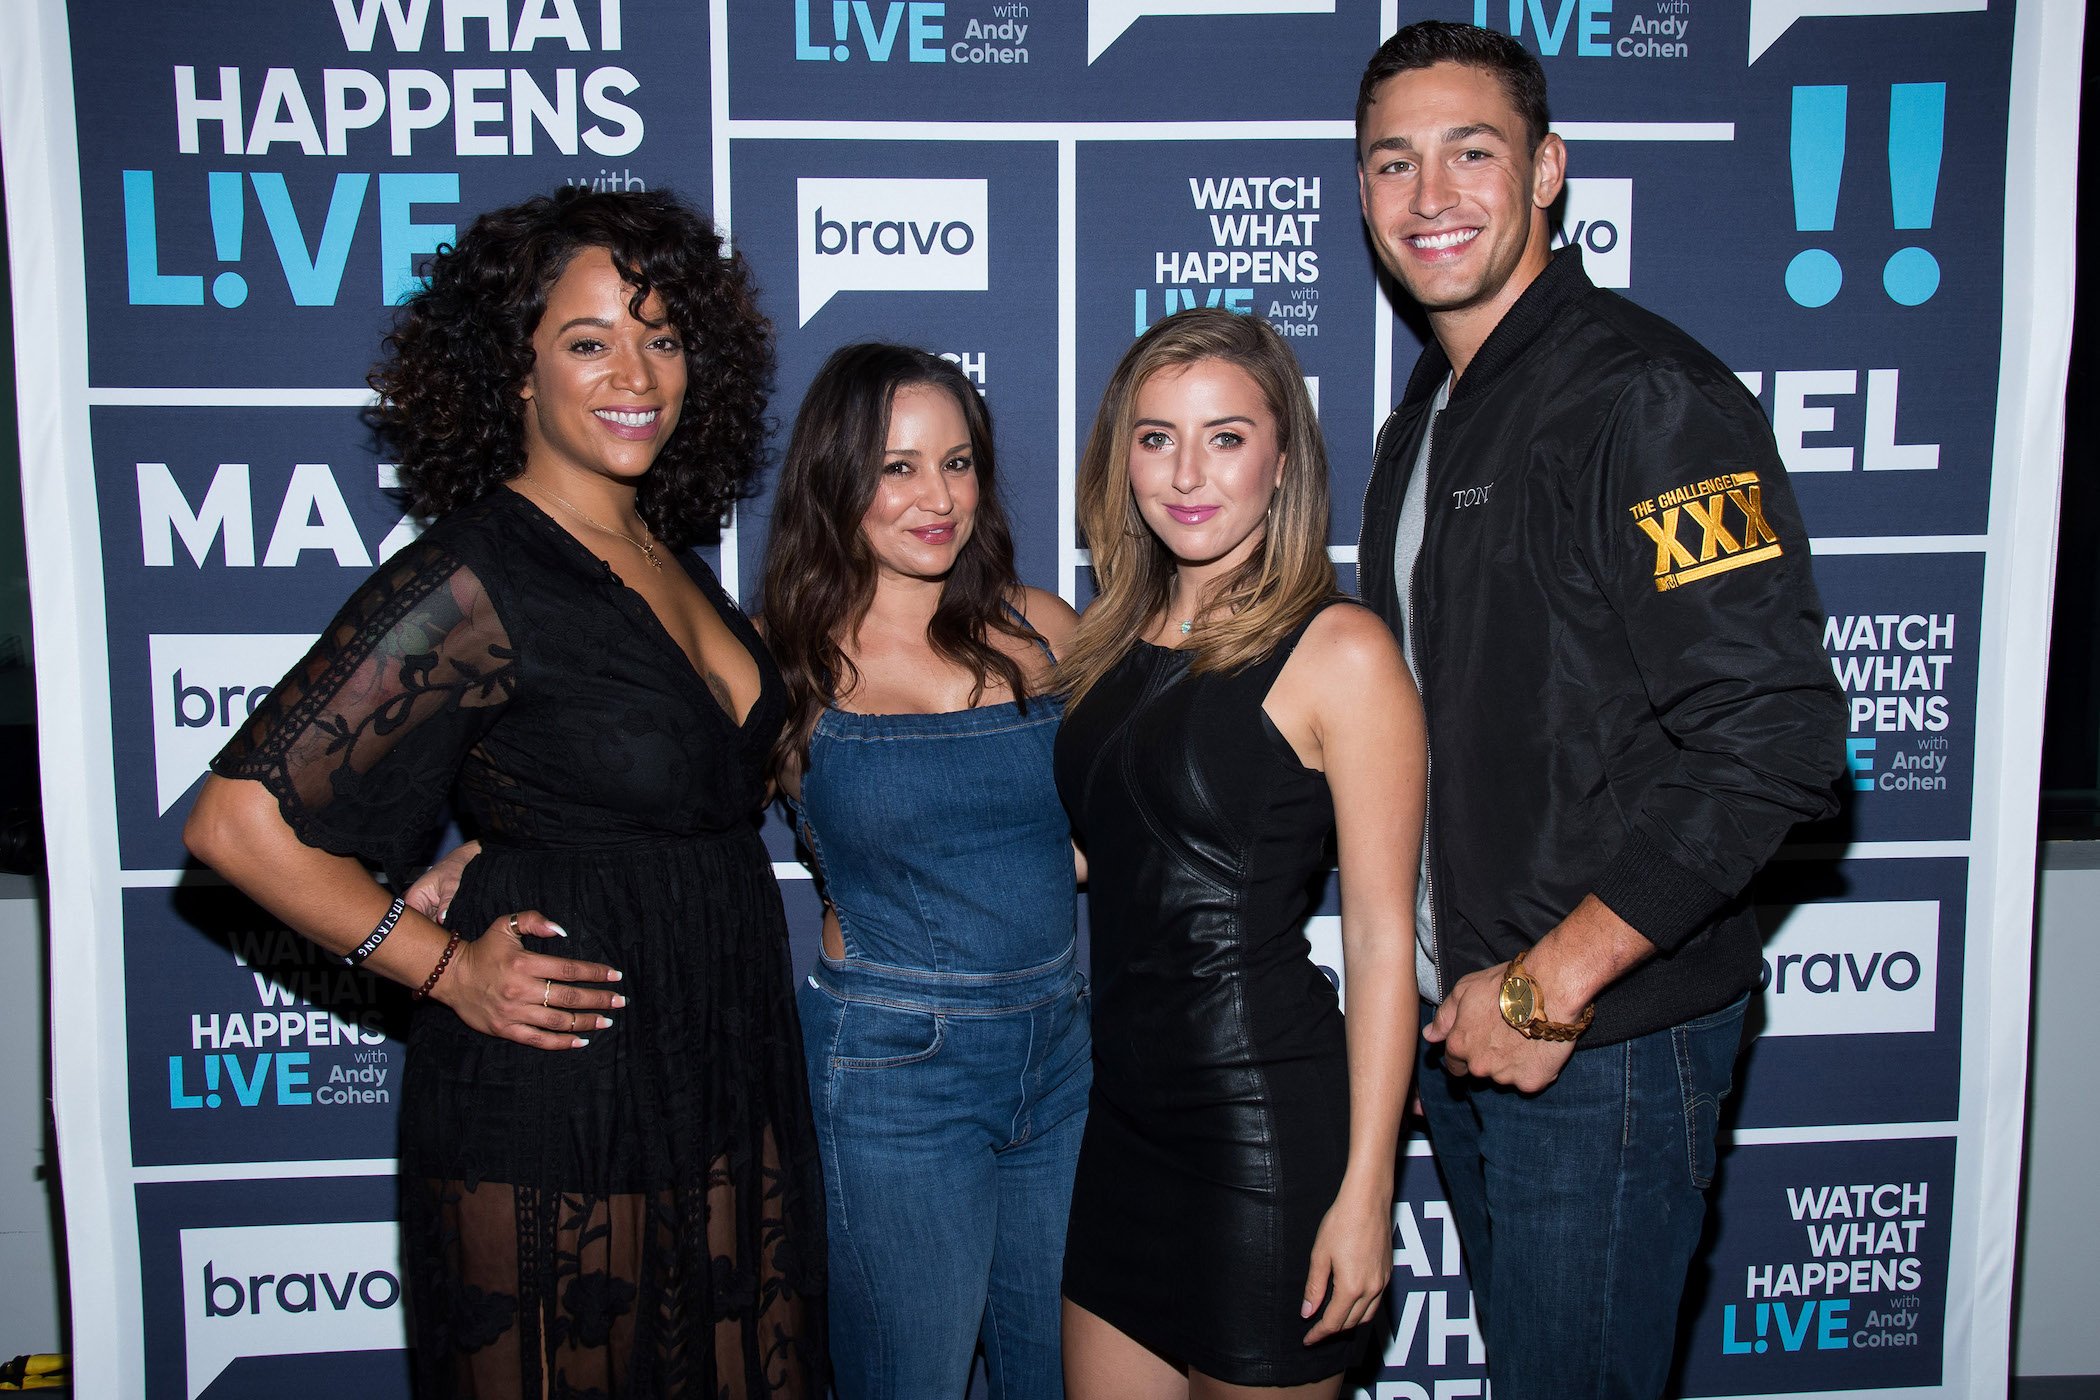 Aneesa Ferrier, Veronica Portillo, Camila Nakagawa, and Tony Raines from 'The Challenge' standing together and smiling